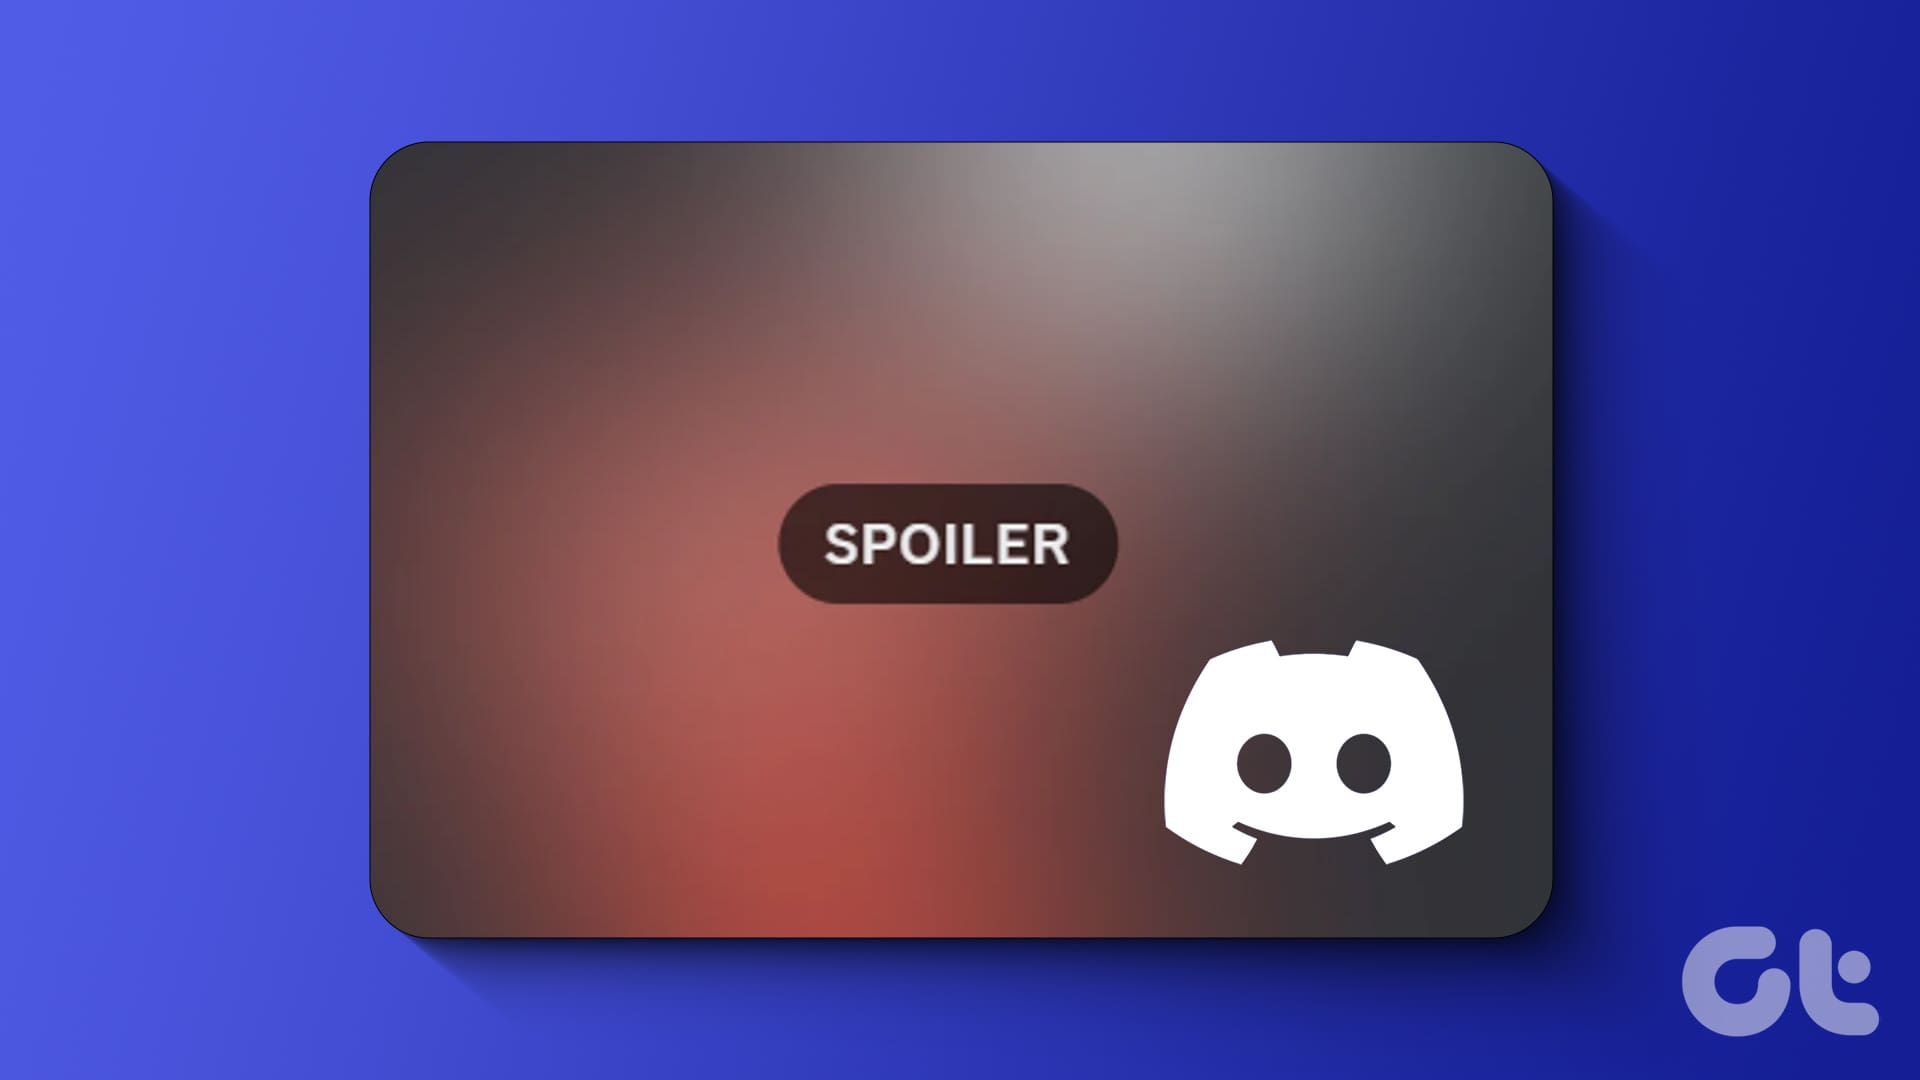 How to Spoiler (Text or Image) on Discord